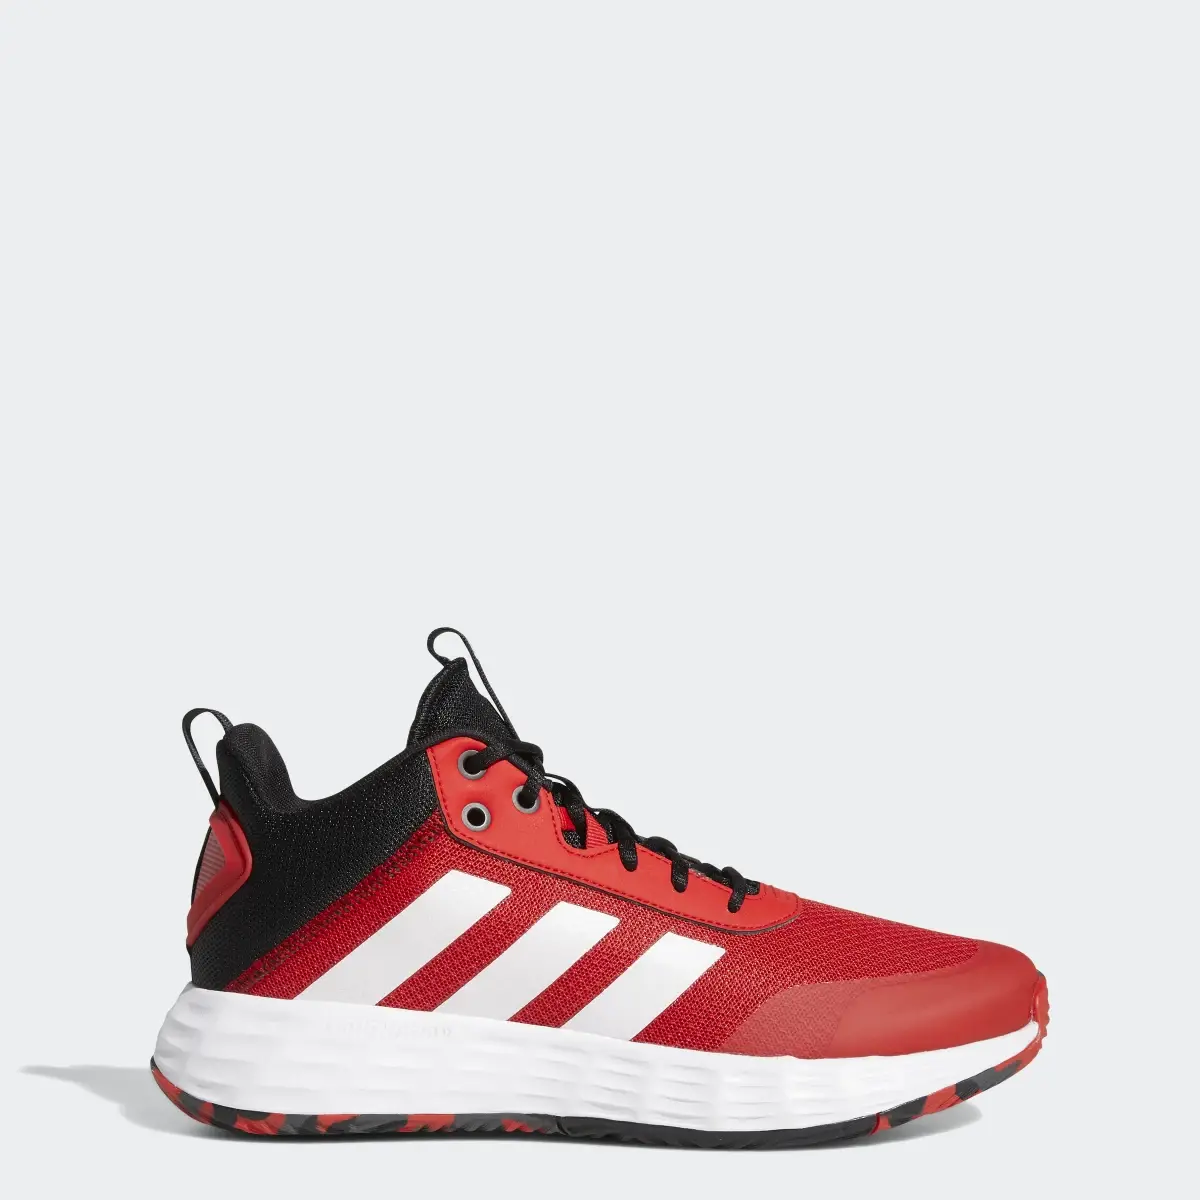 Adidas Ownthegame Basketball Shoes. 1